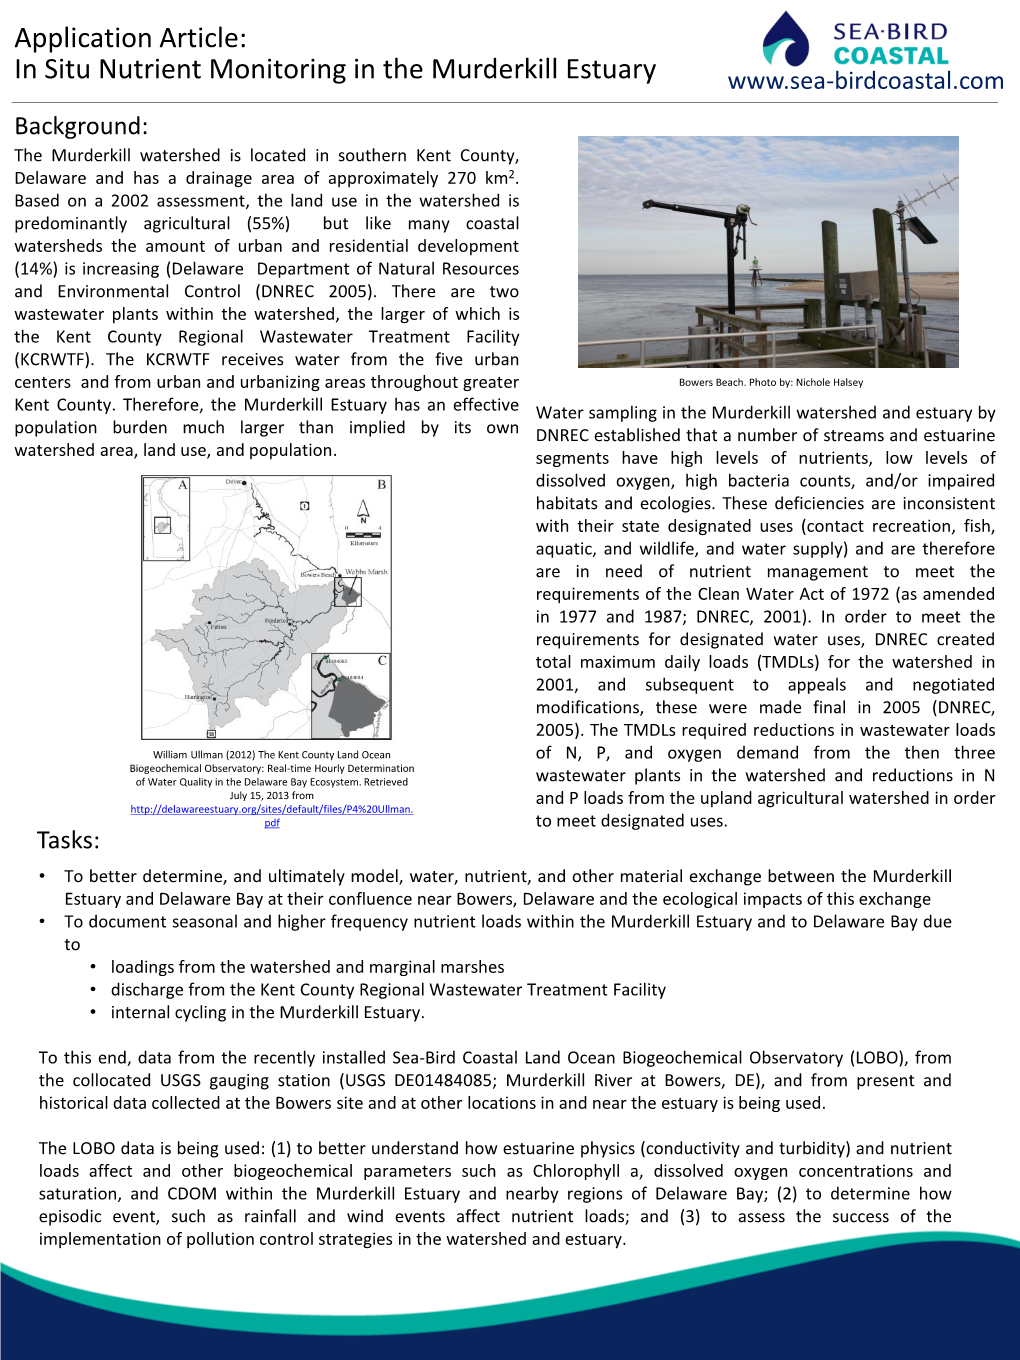 In Situ Nutrient Monitoring in the Murderkill Estuary Application Article